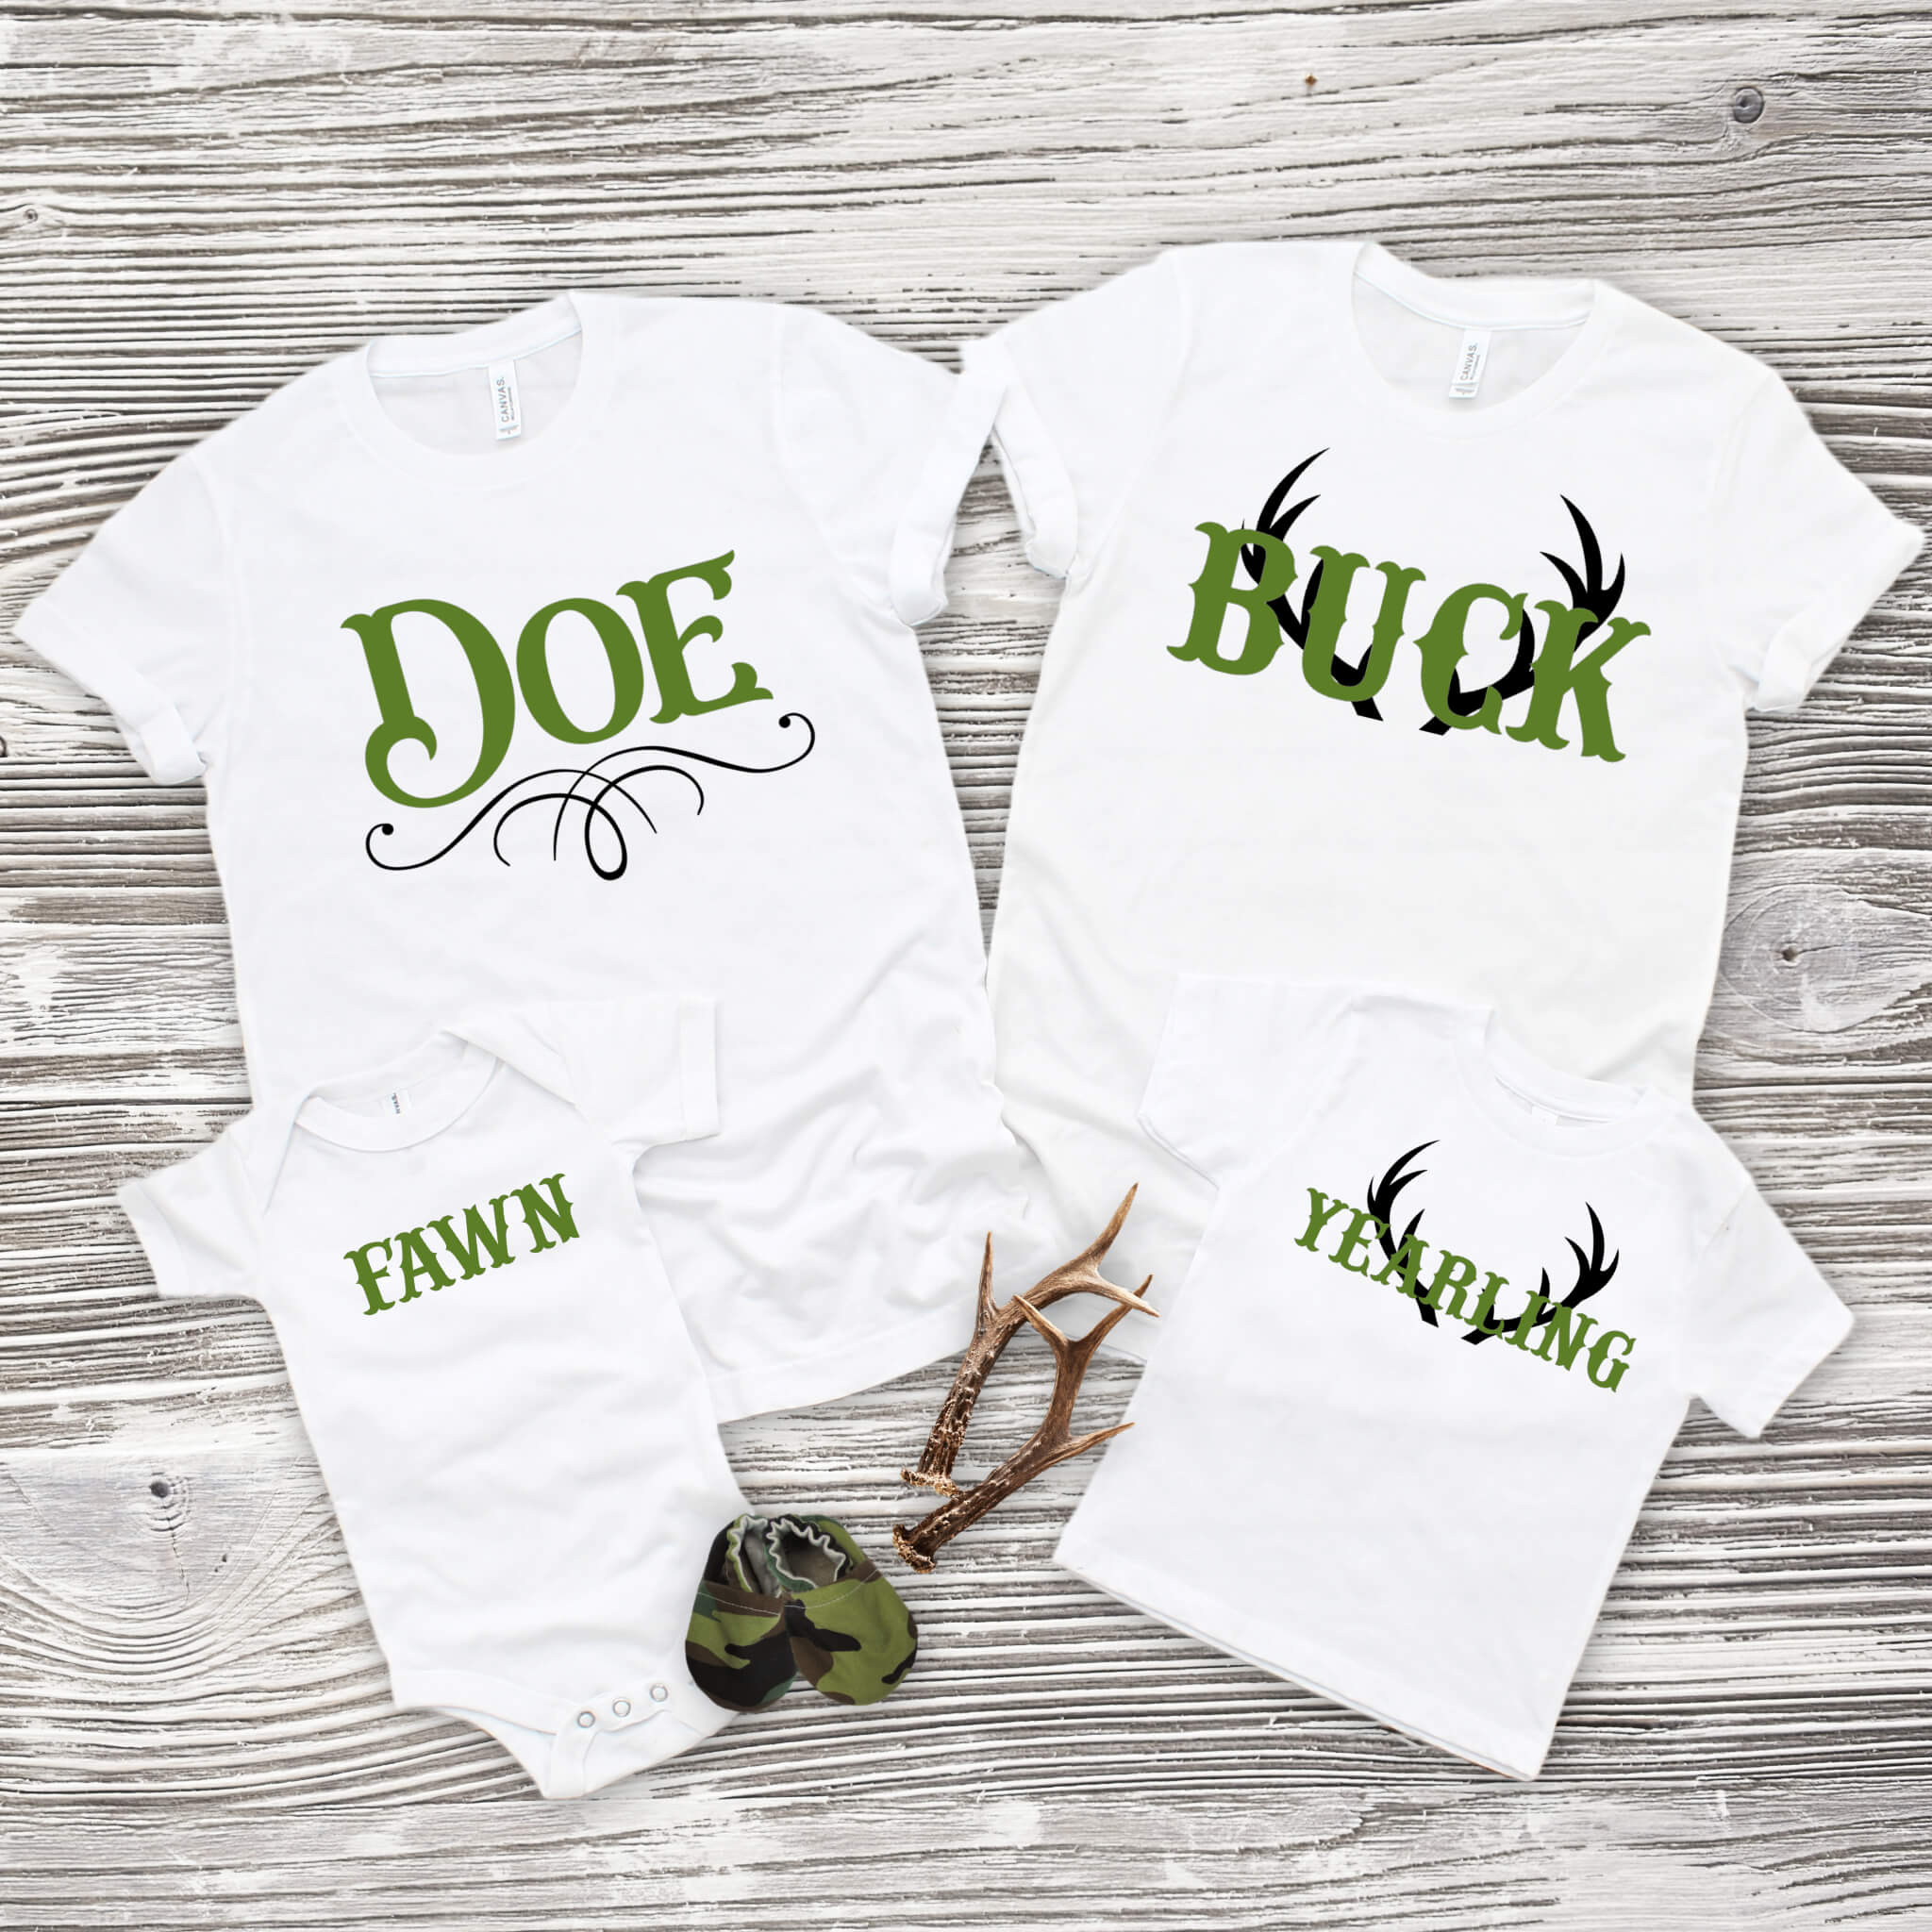 Big Buck and Little Buck Shirts Matching Father Son Shirts from Dad & Lads 3X-Large/24 Mo Bodysuit